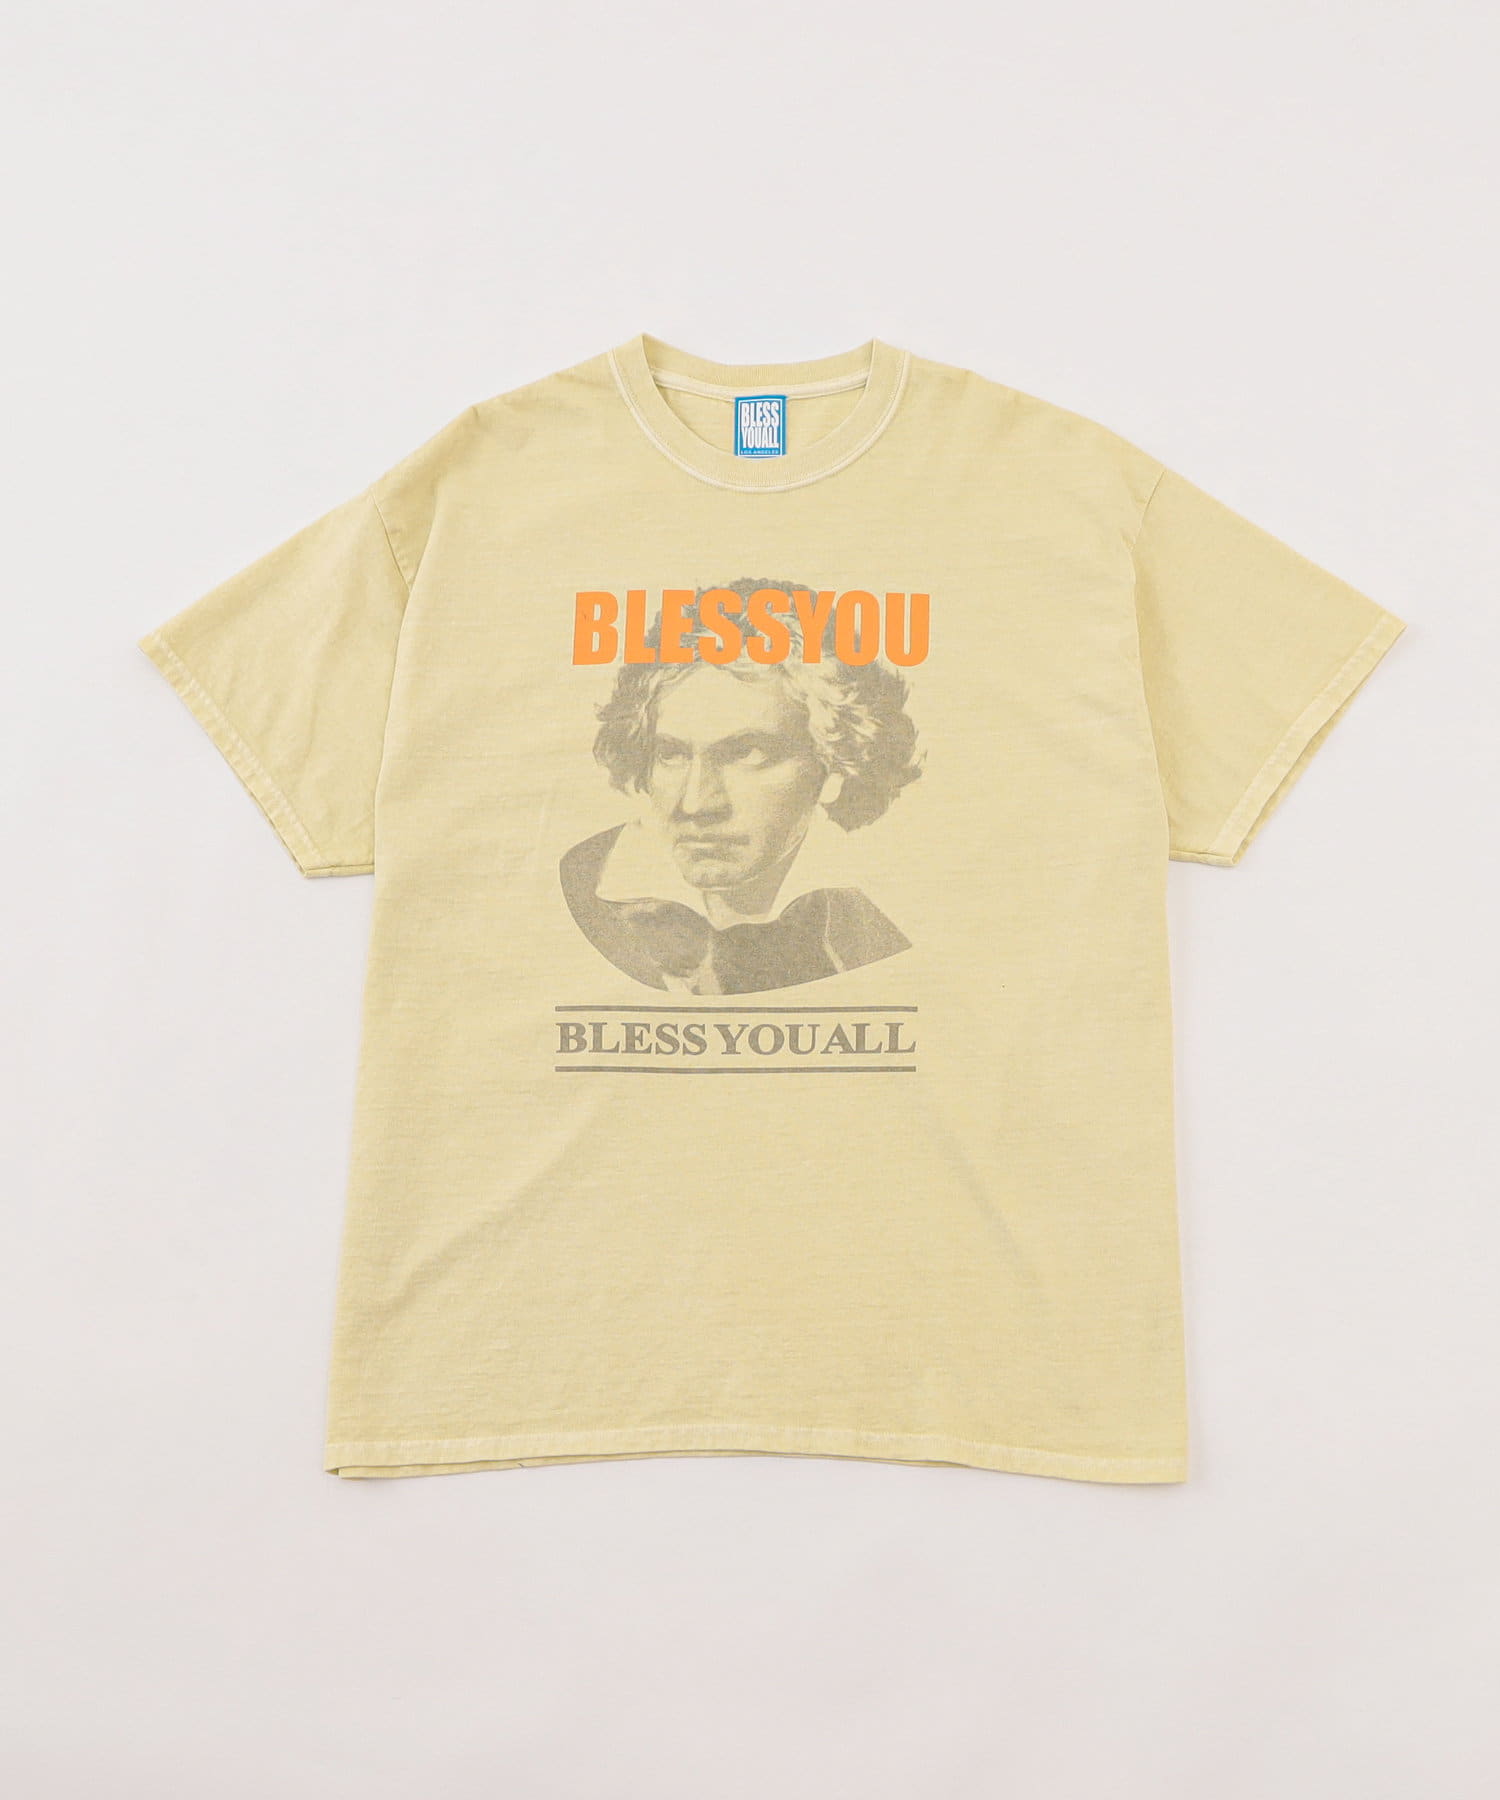 WHO’S WHO gallery(フーズフーギャラリー) 【BLESS YOU/ブレスユー】ベートーベンTEE